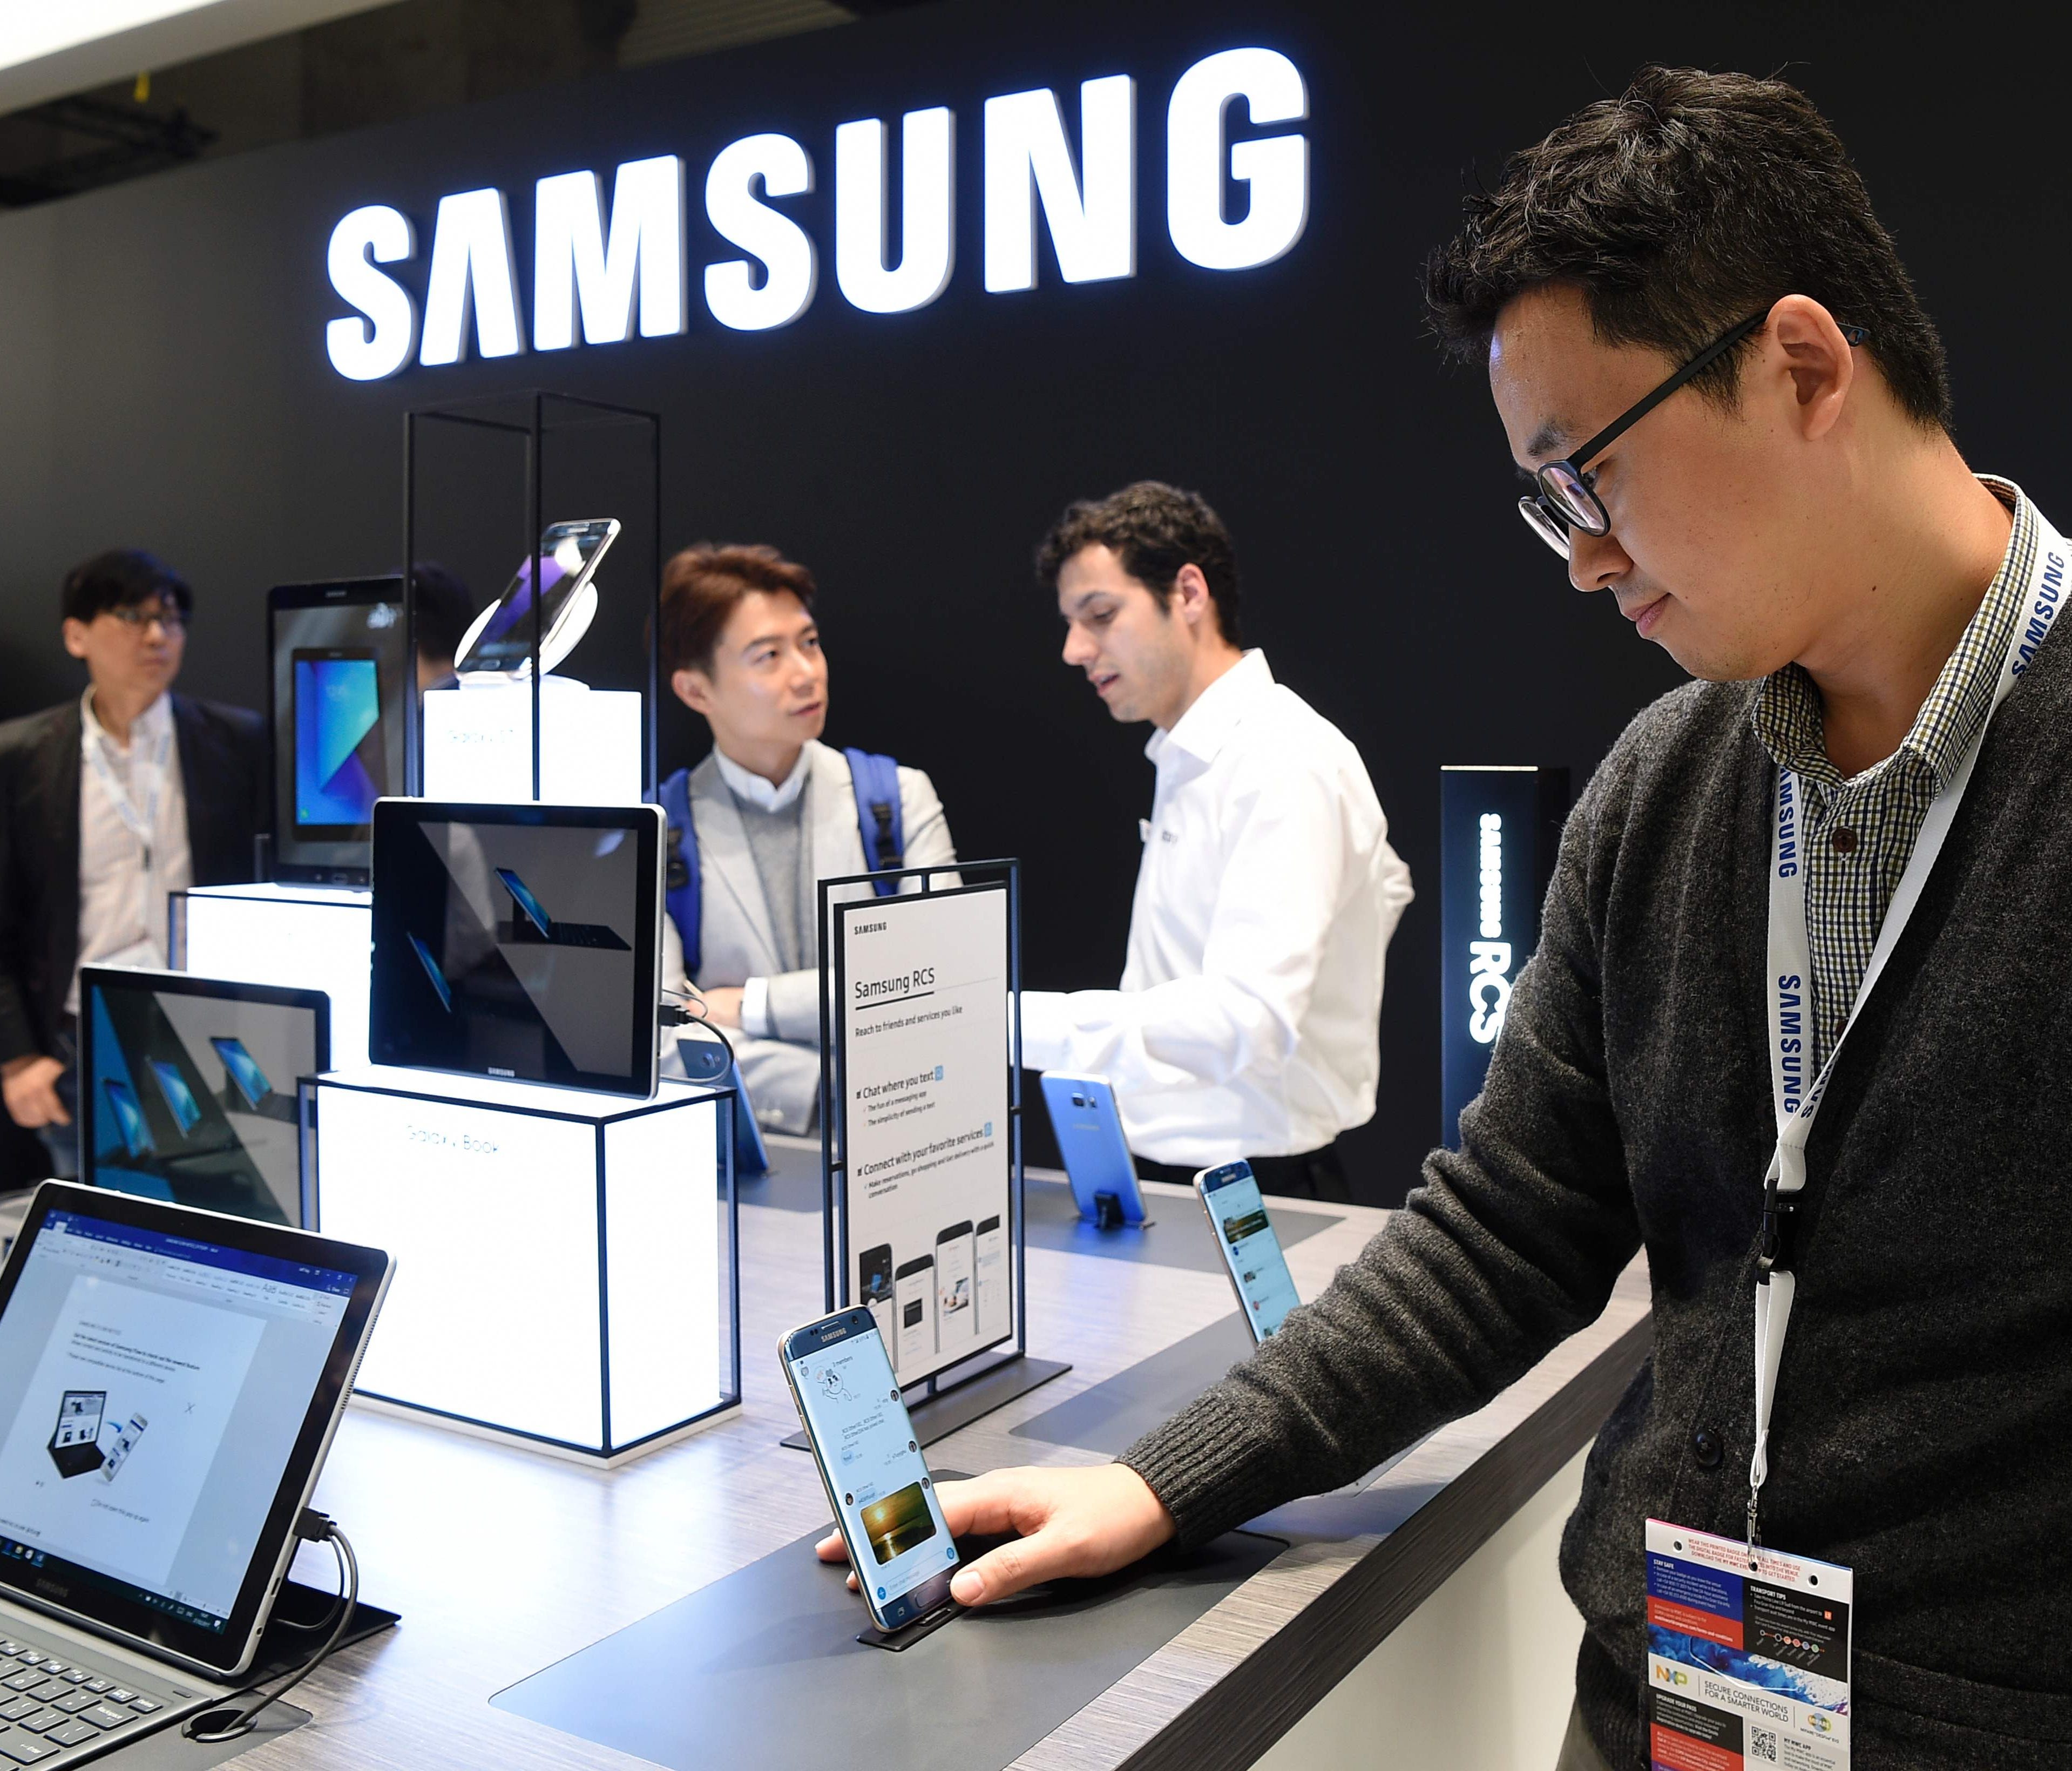 Visitors try devices at the stand of Samsung on the first day of the Mobile World Congress in Barcelona.